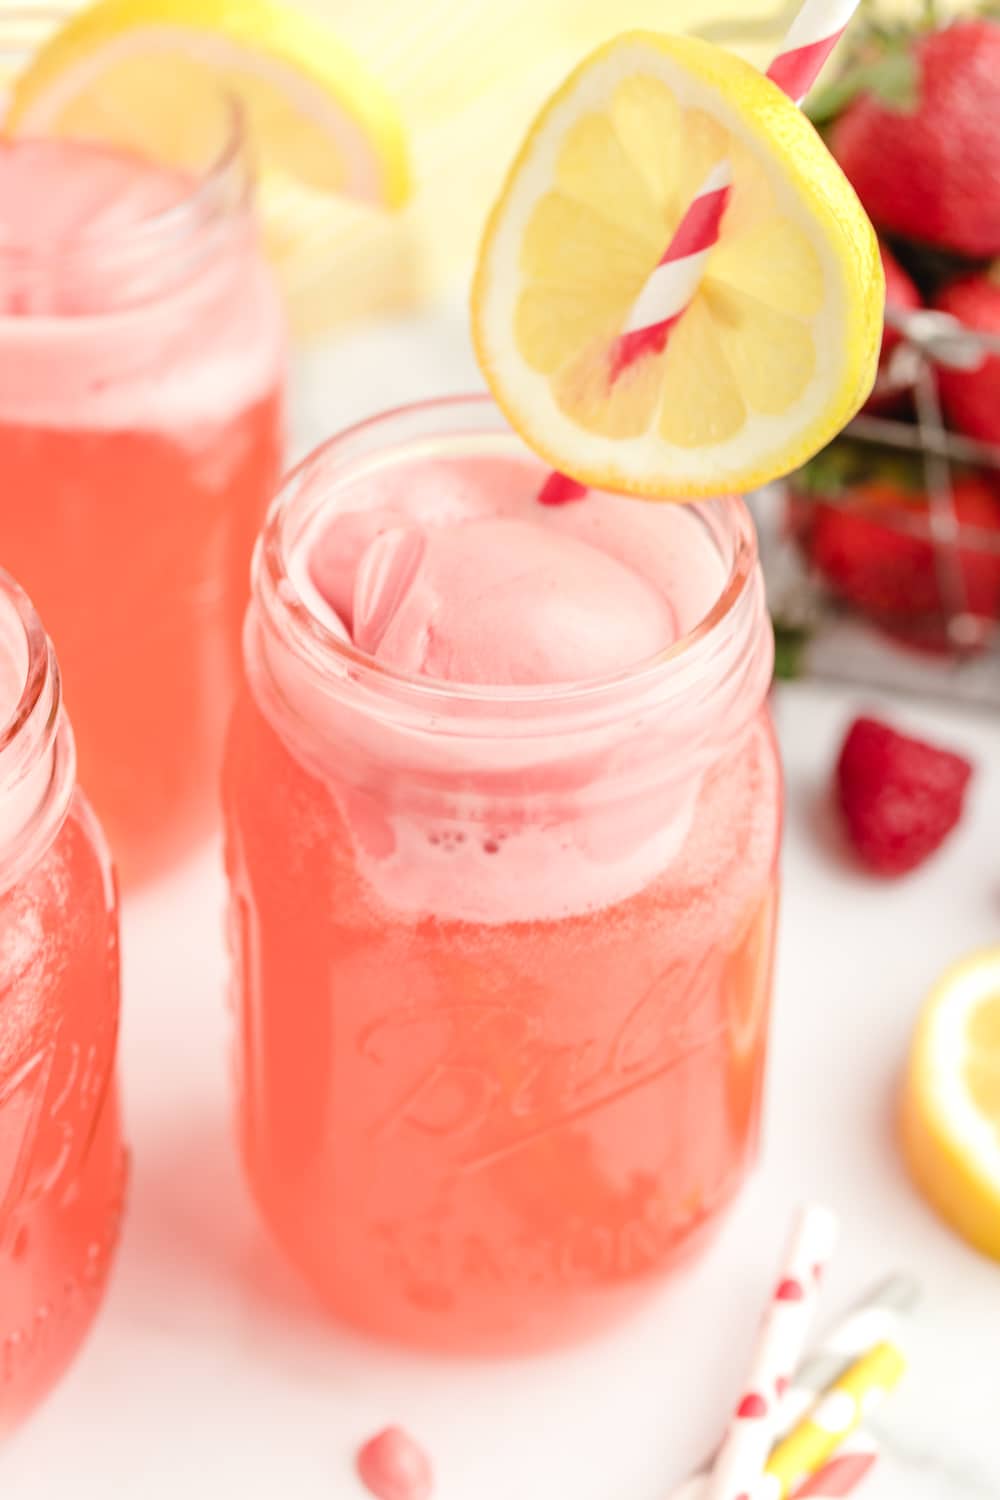 This Sweetheart punch is a delicious drink recipe that your friends will just love!  You only need three simple ingredients to bring this flavorful punch to your next party!